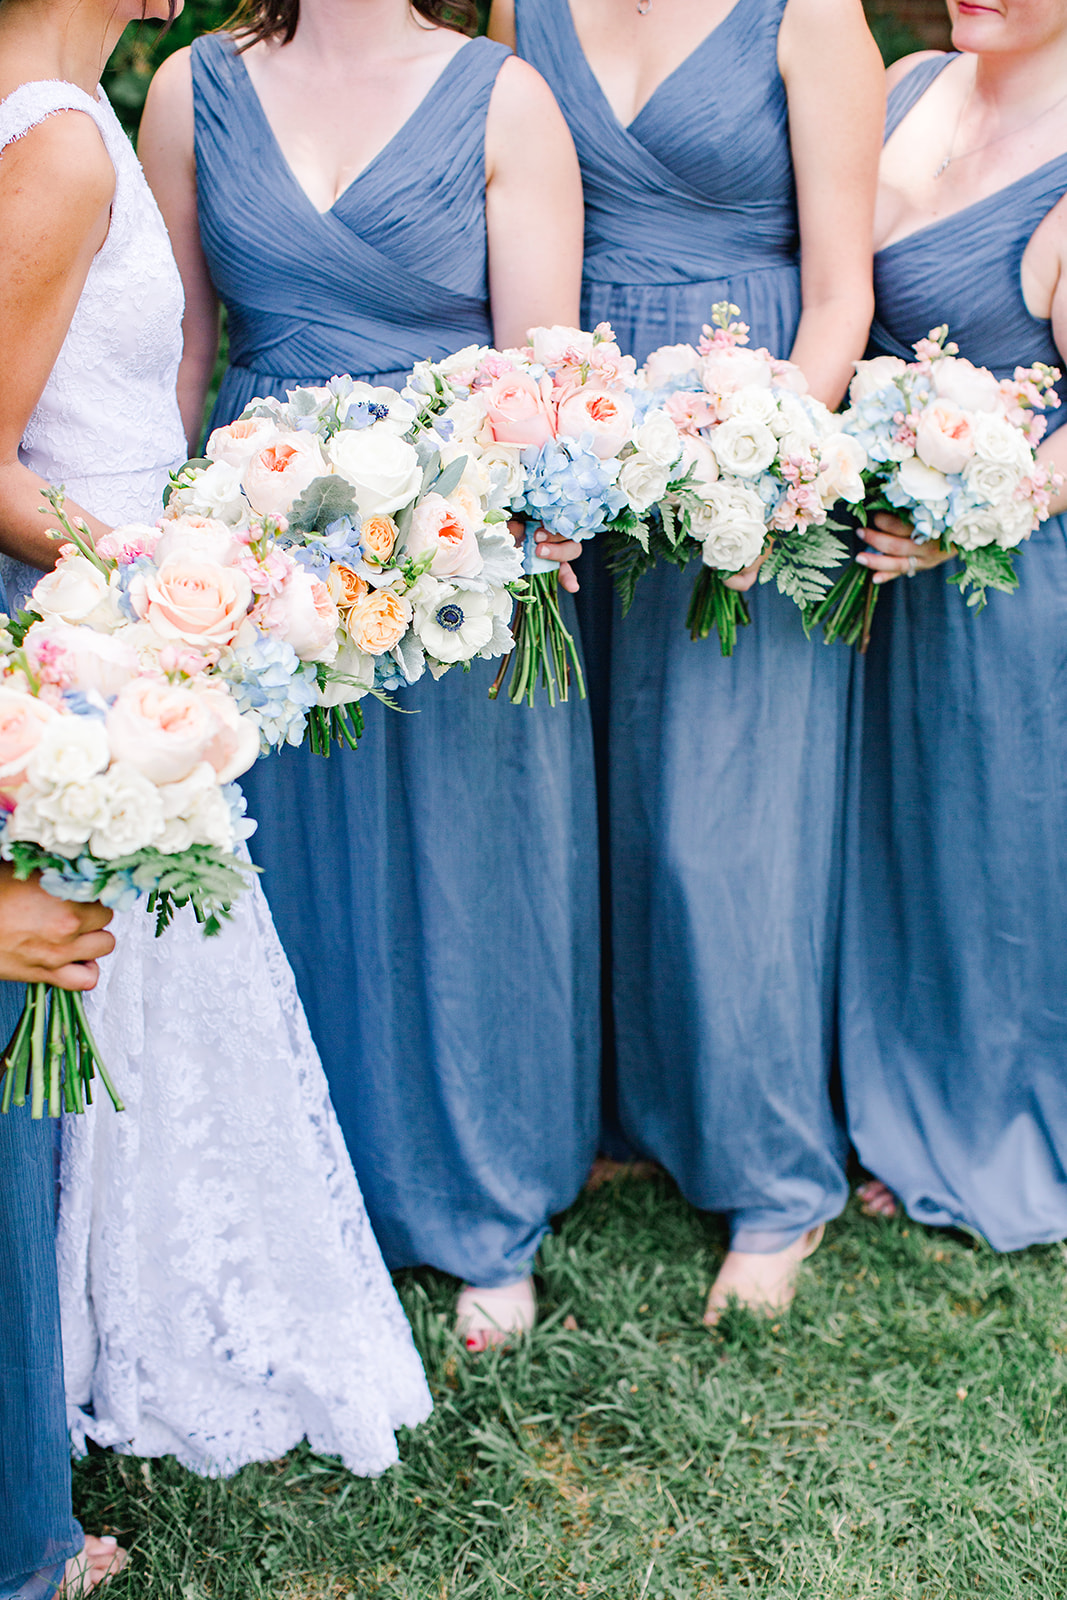 This Blue and White Wedding Featured a Chinoiserie Garden Party Theme